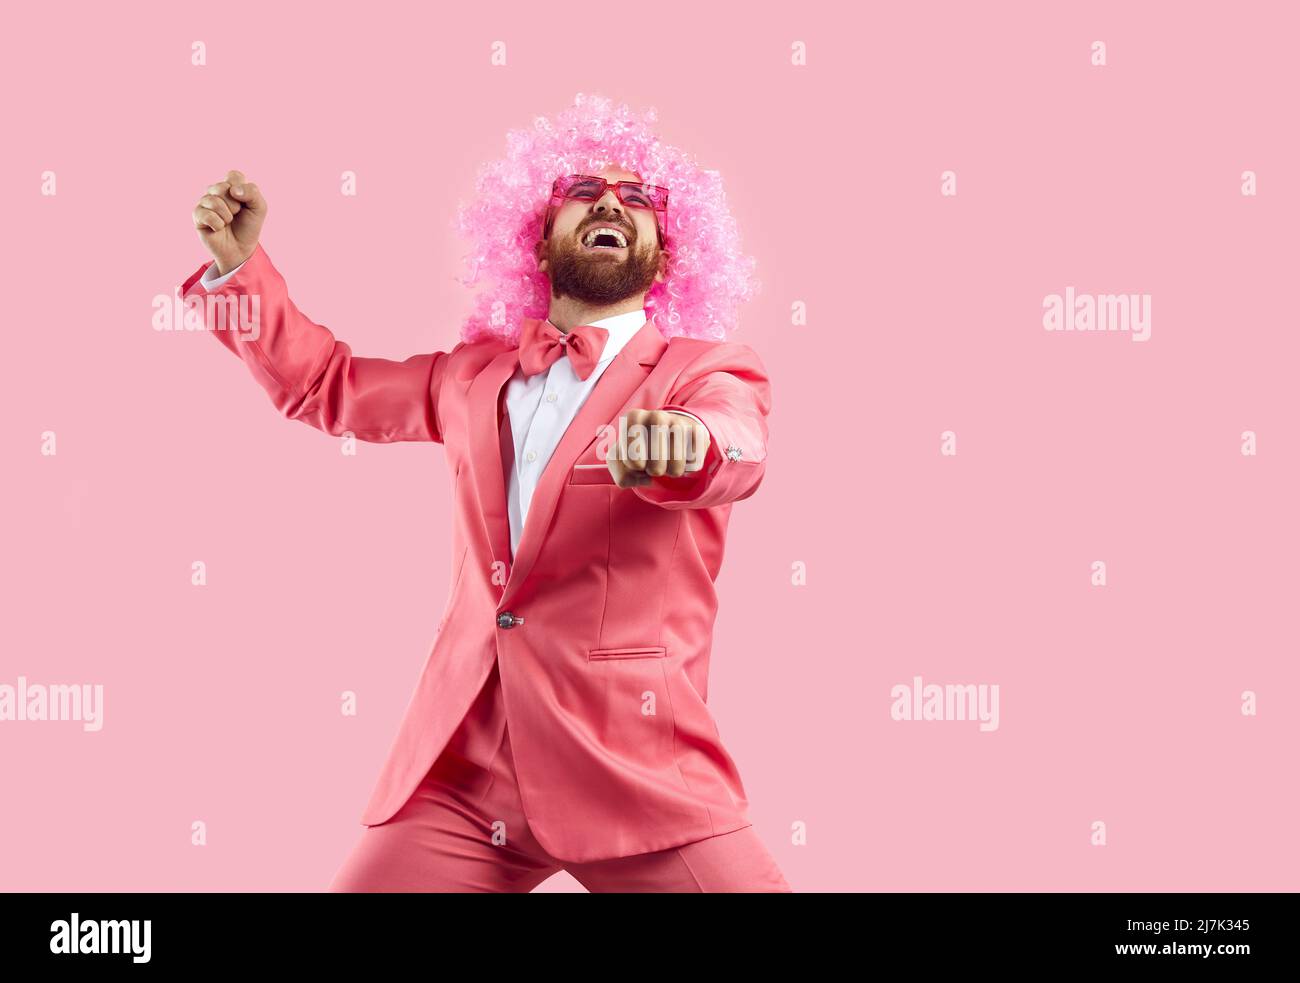 Cheerful crazy man in pink wig making funny dance moves isolated on pink  background Stock Photo - Alamy